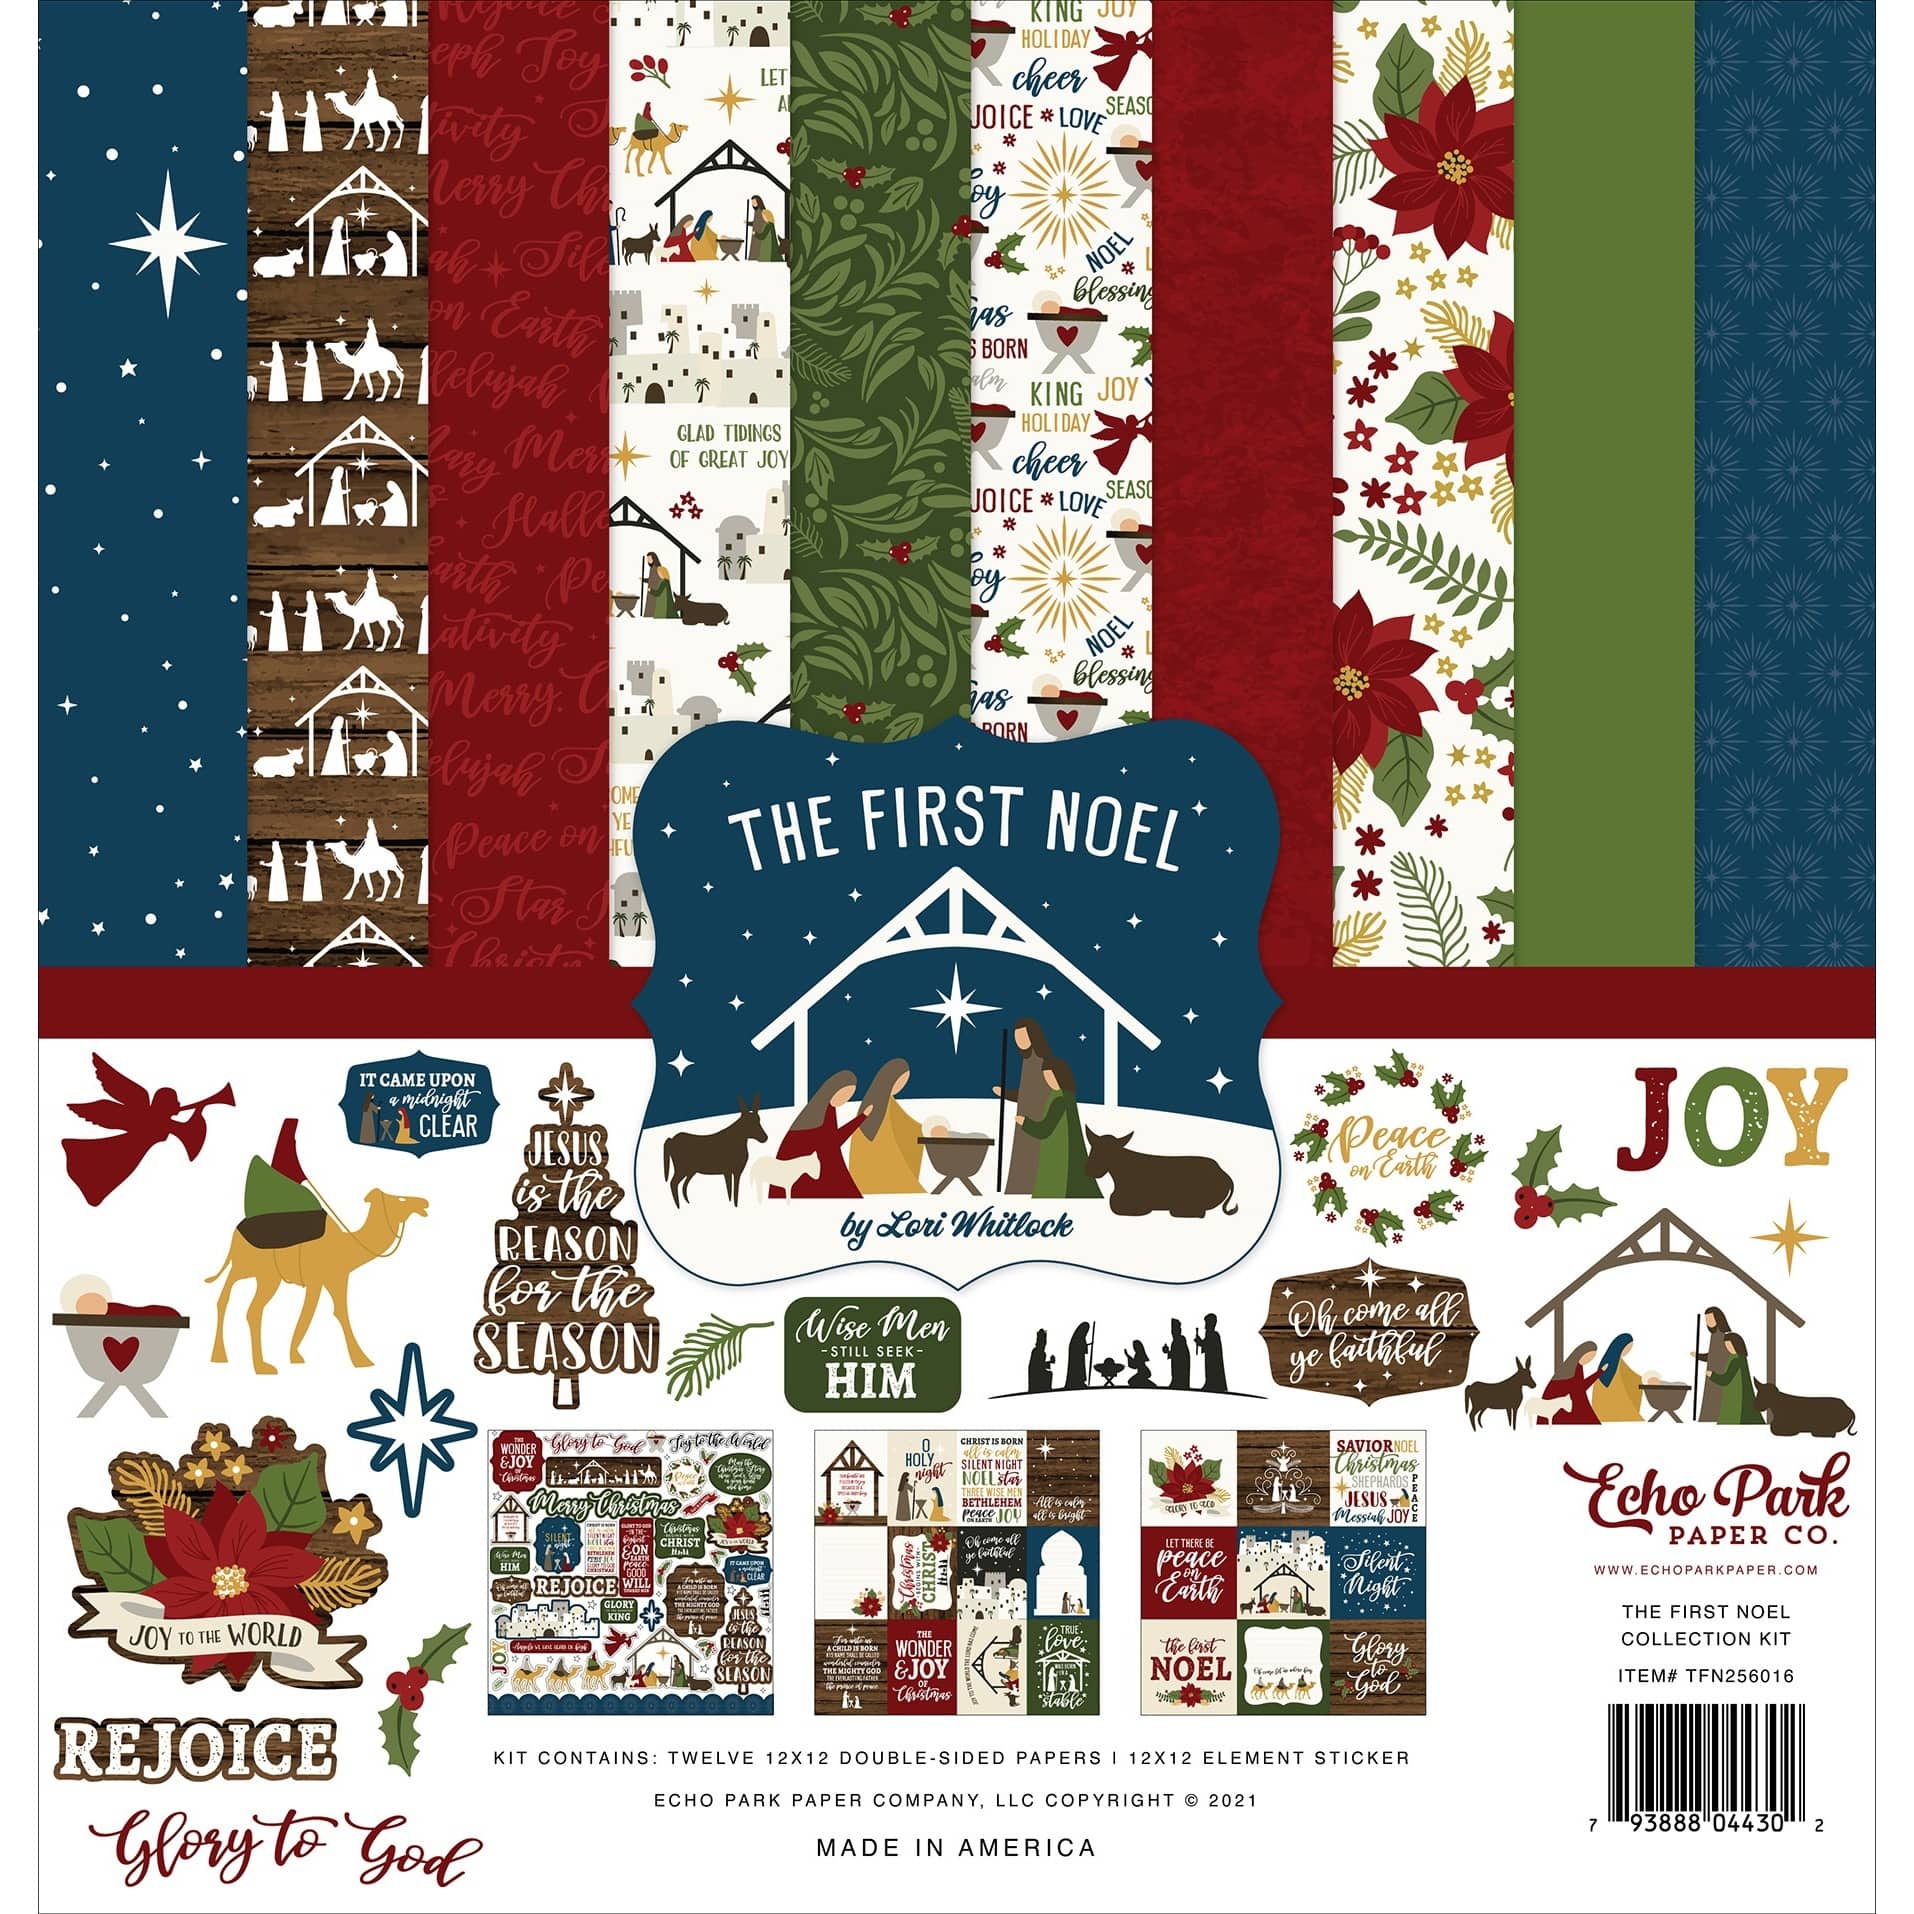 Christmas Paper Pads by Recollections